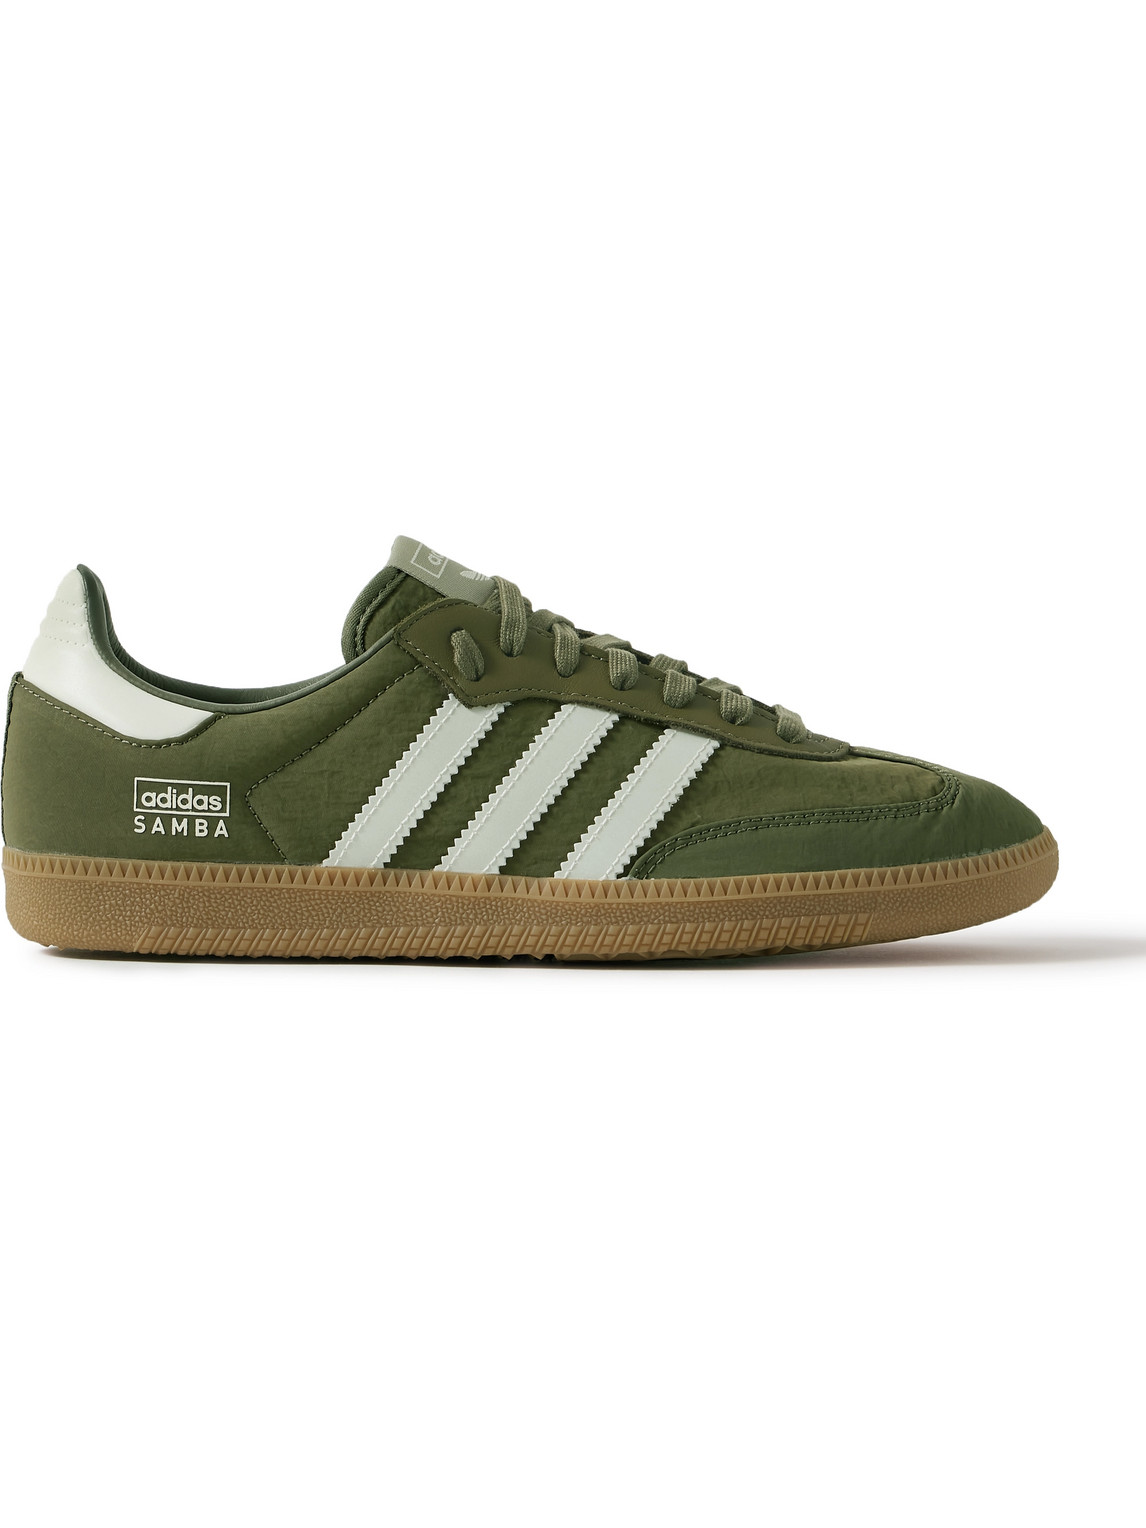 Adidas Originals Samba Og Leather-trimmed Crinkled-shell Sneakers In Green